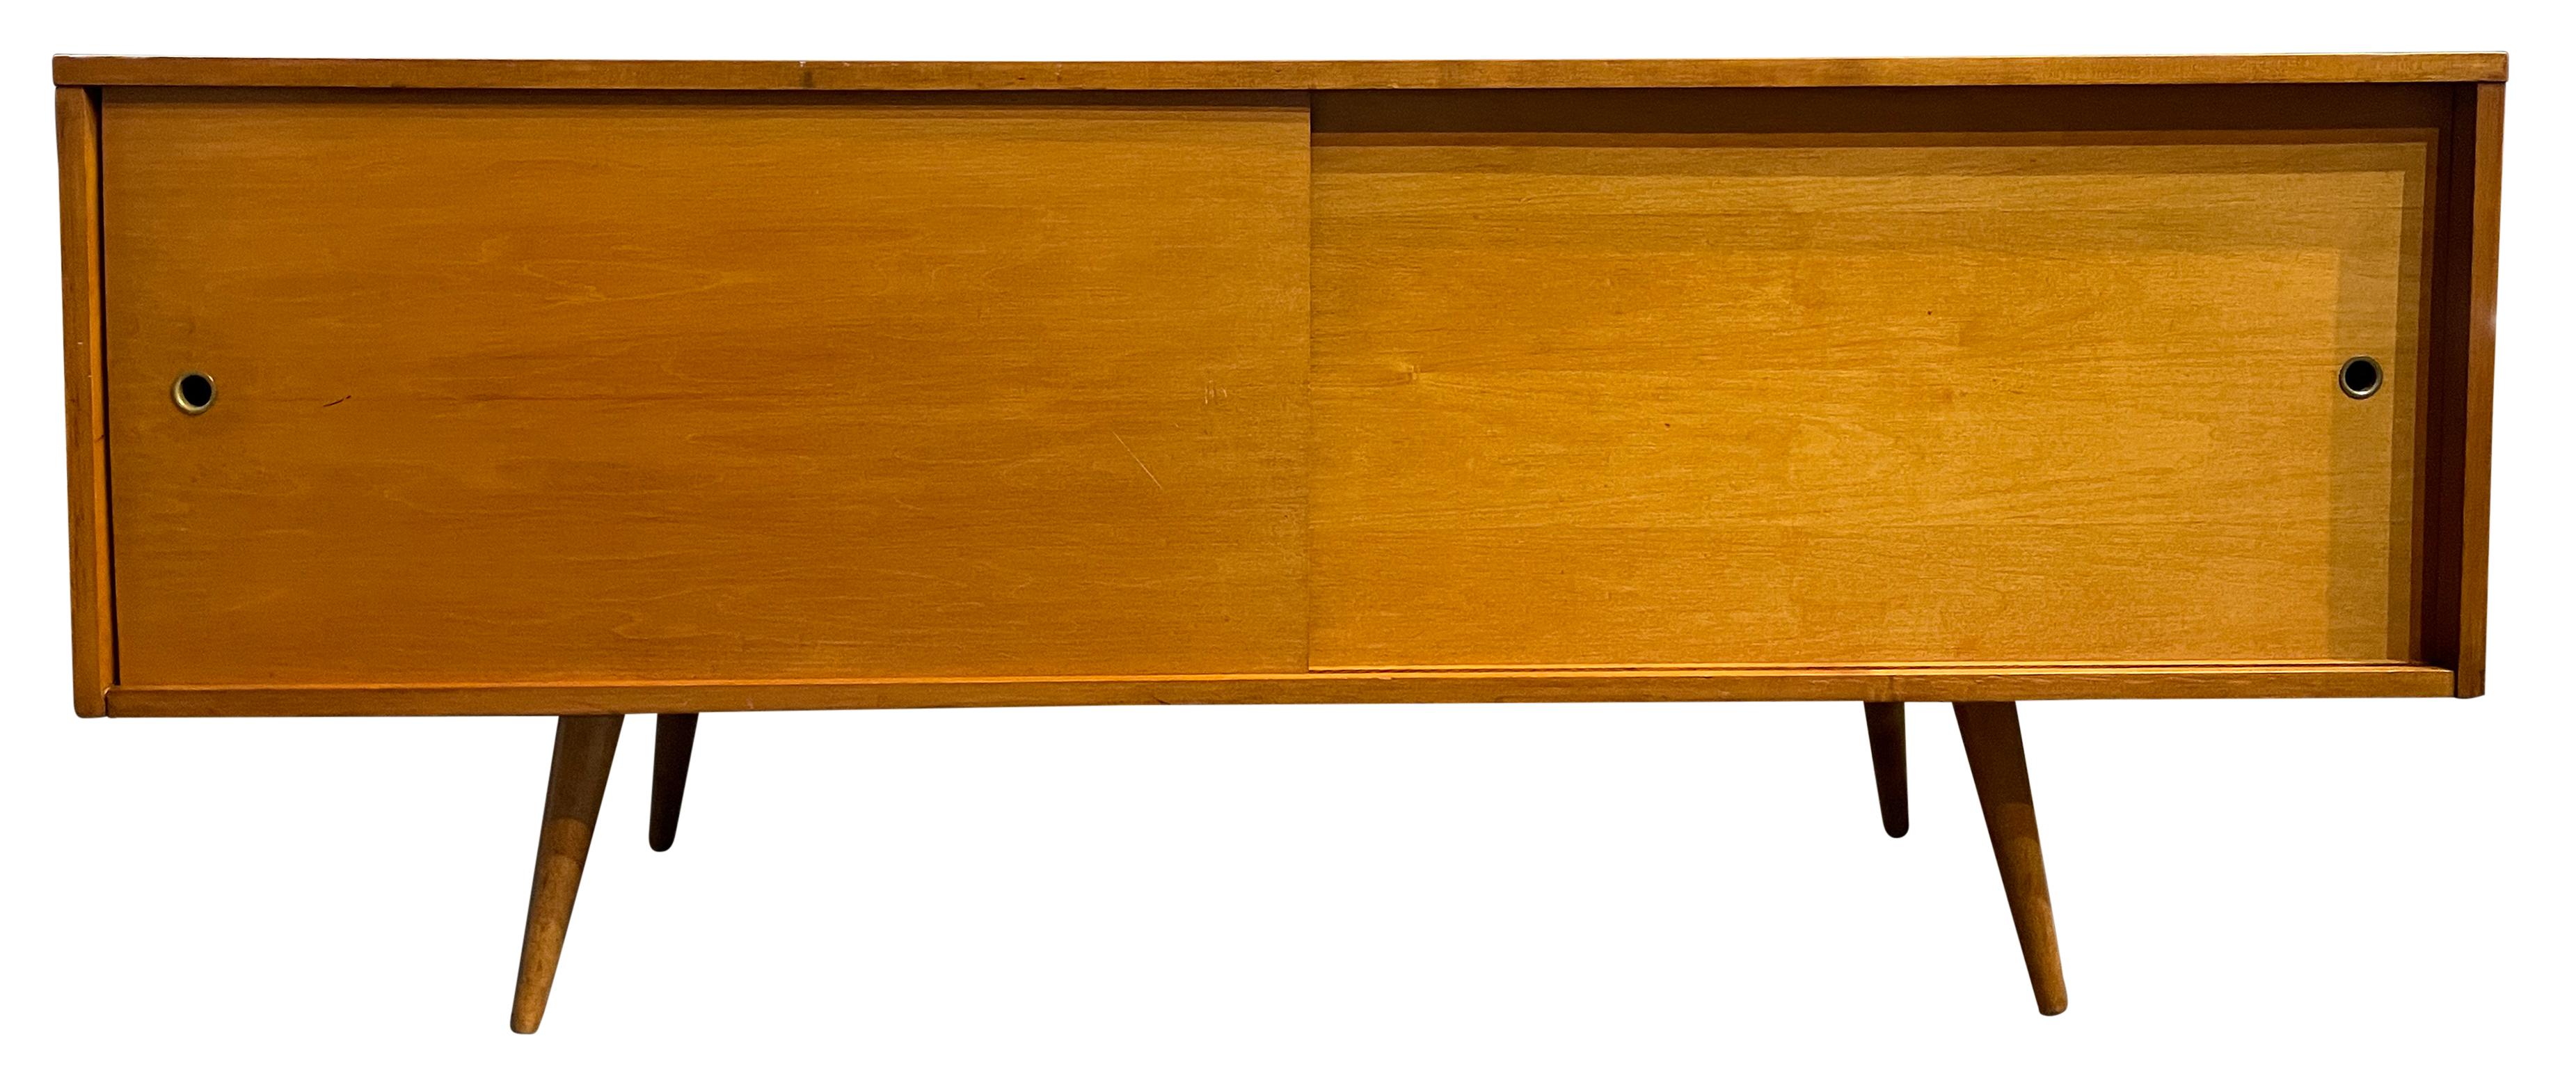 20th Century Midcentury Credenza by Paul McCobb Planner Group #1513 Wood Doors Maple For Sale